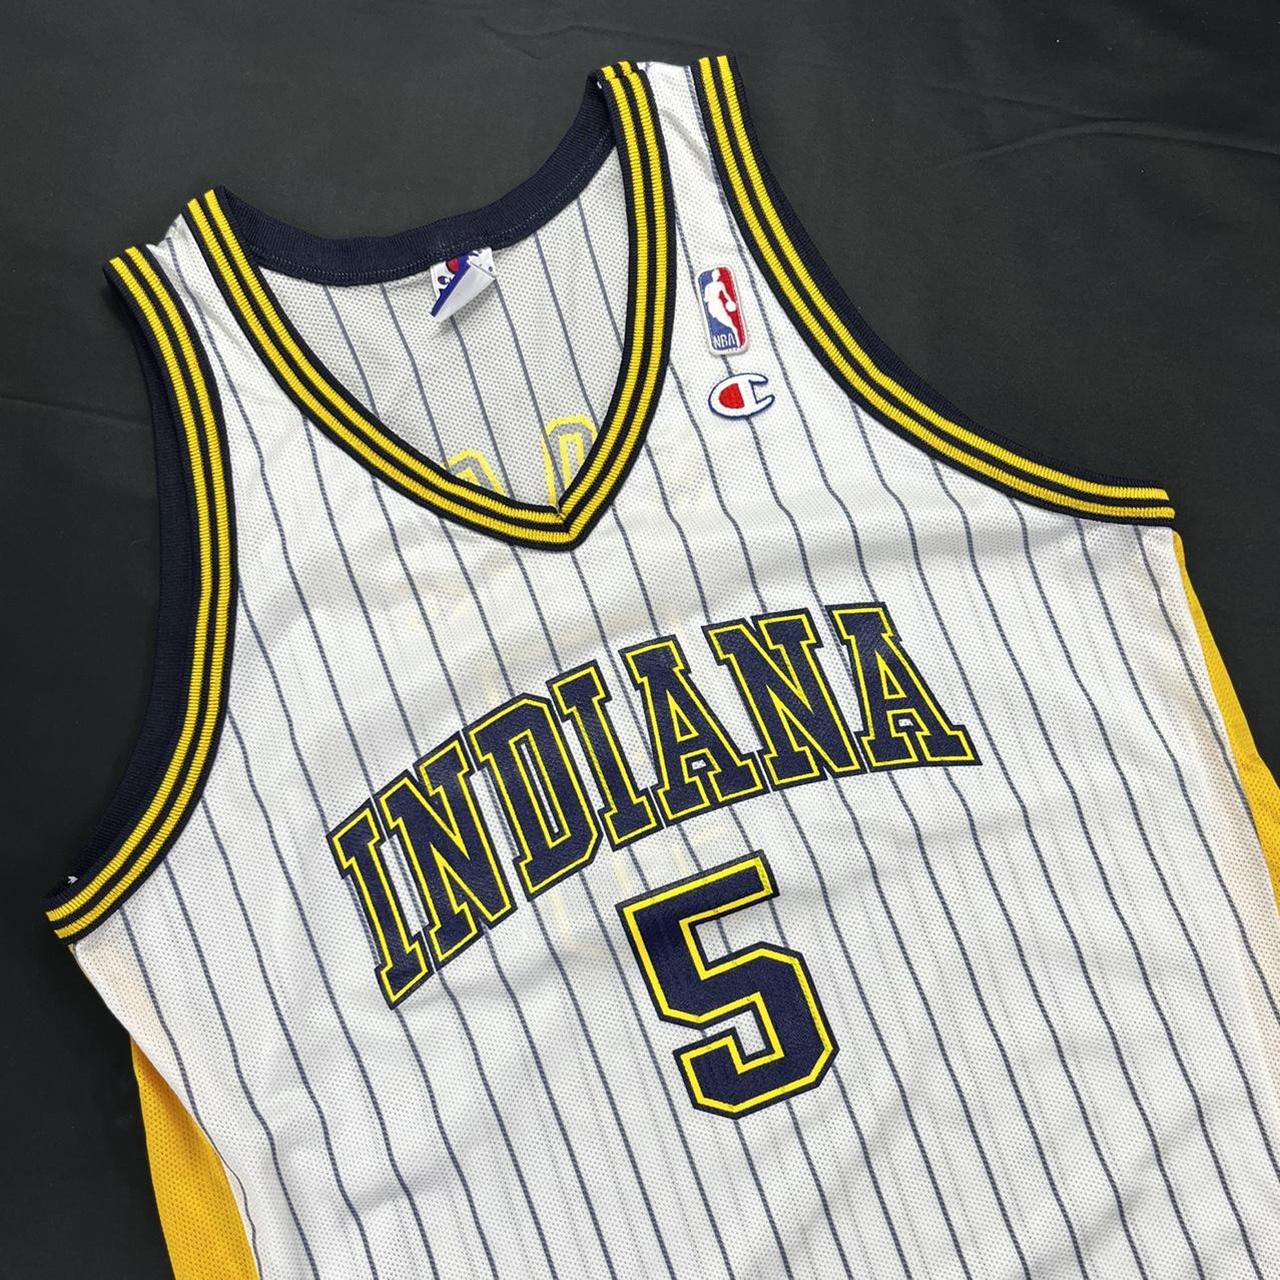 90s JALEN ROSE INDIANA PACERS PINSTRIPED CHAMPION - Depop